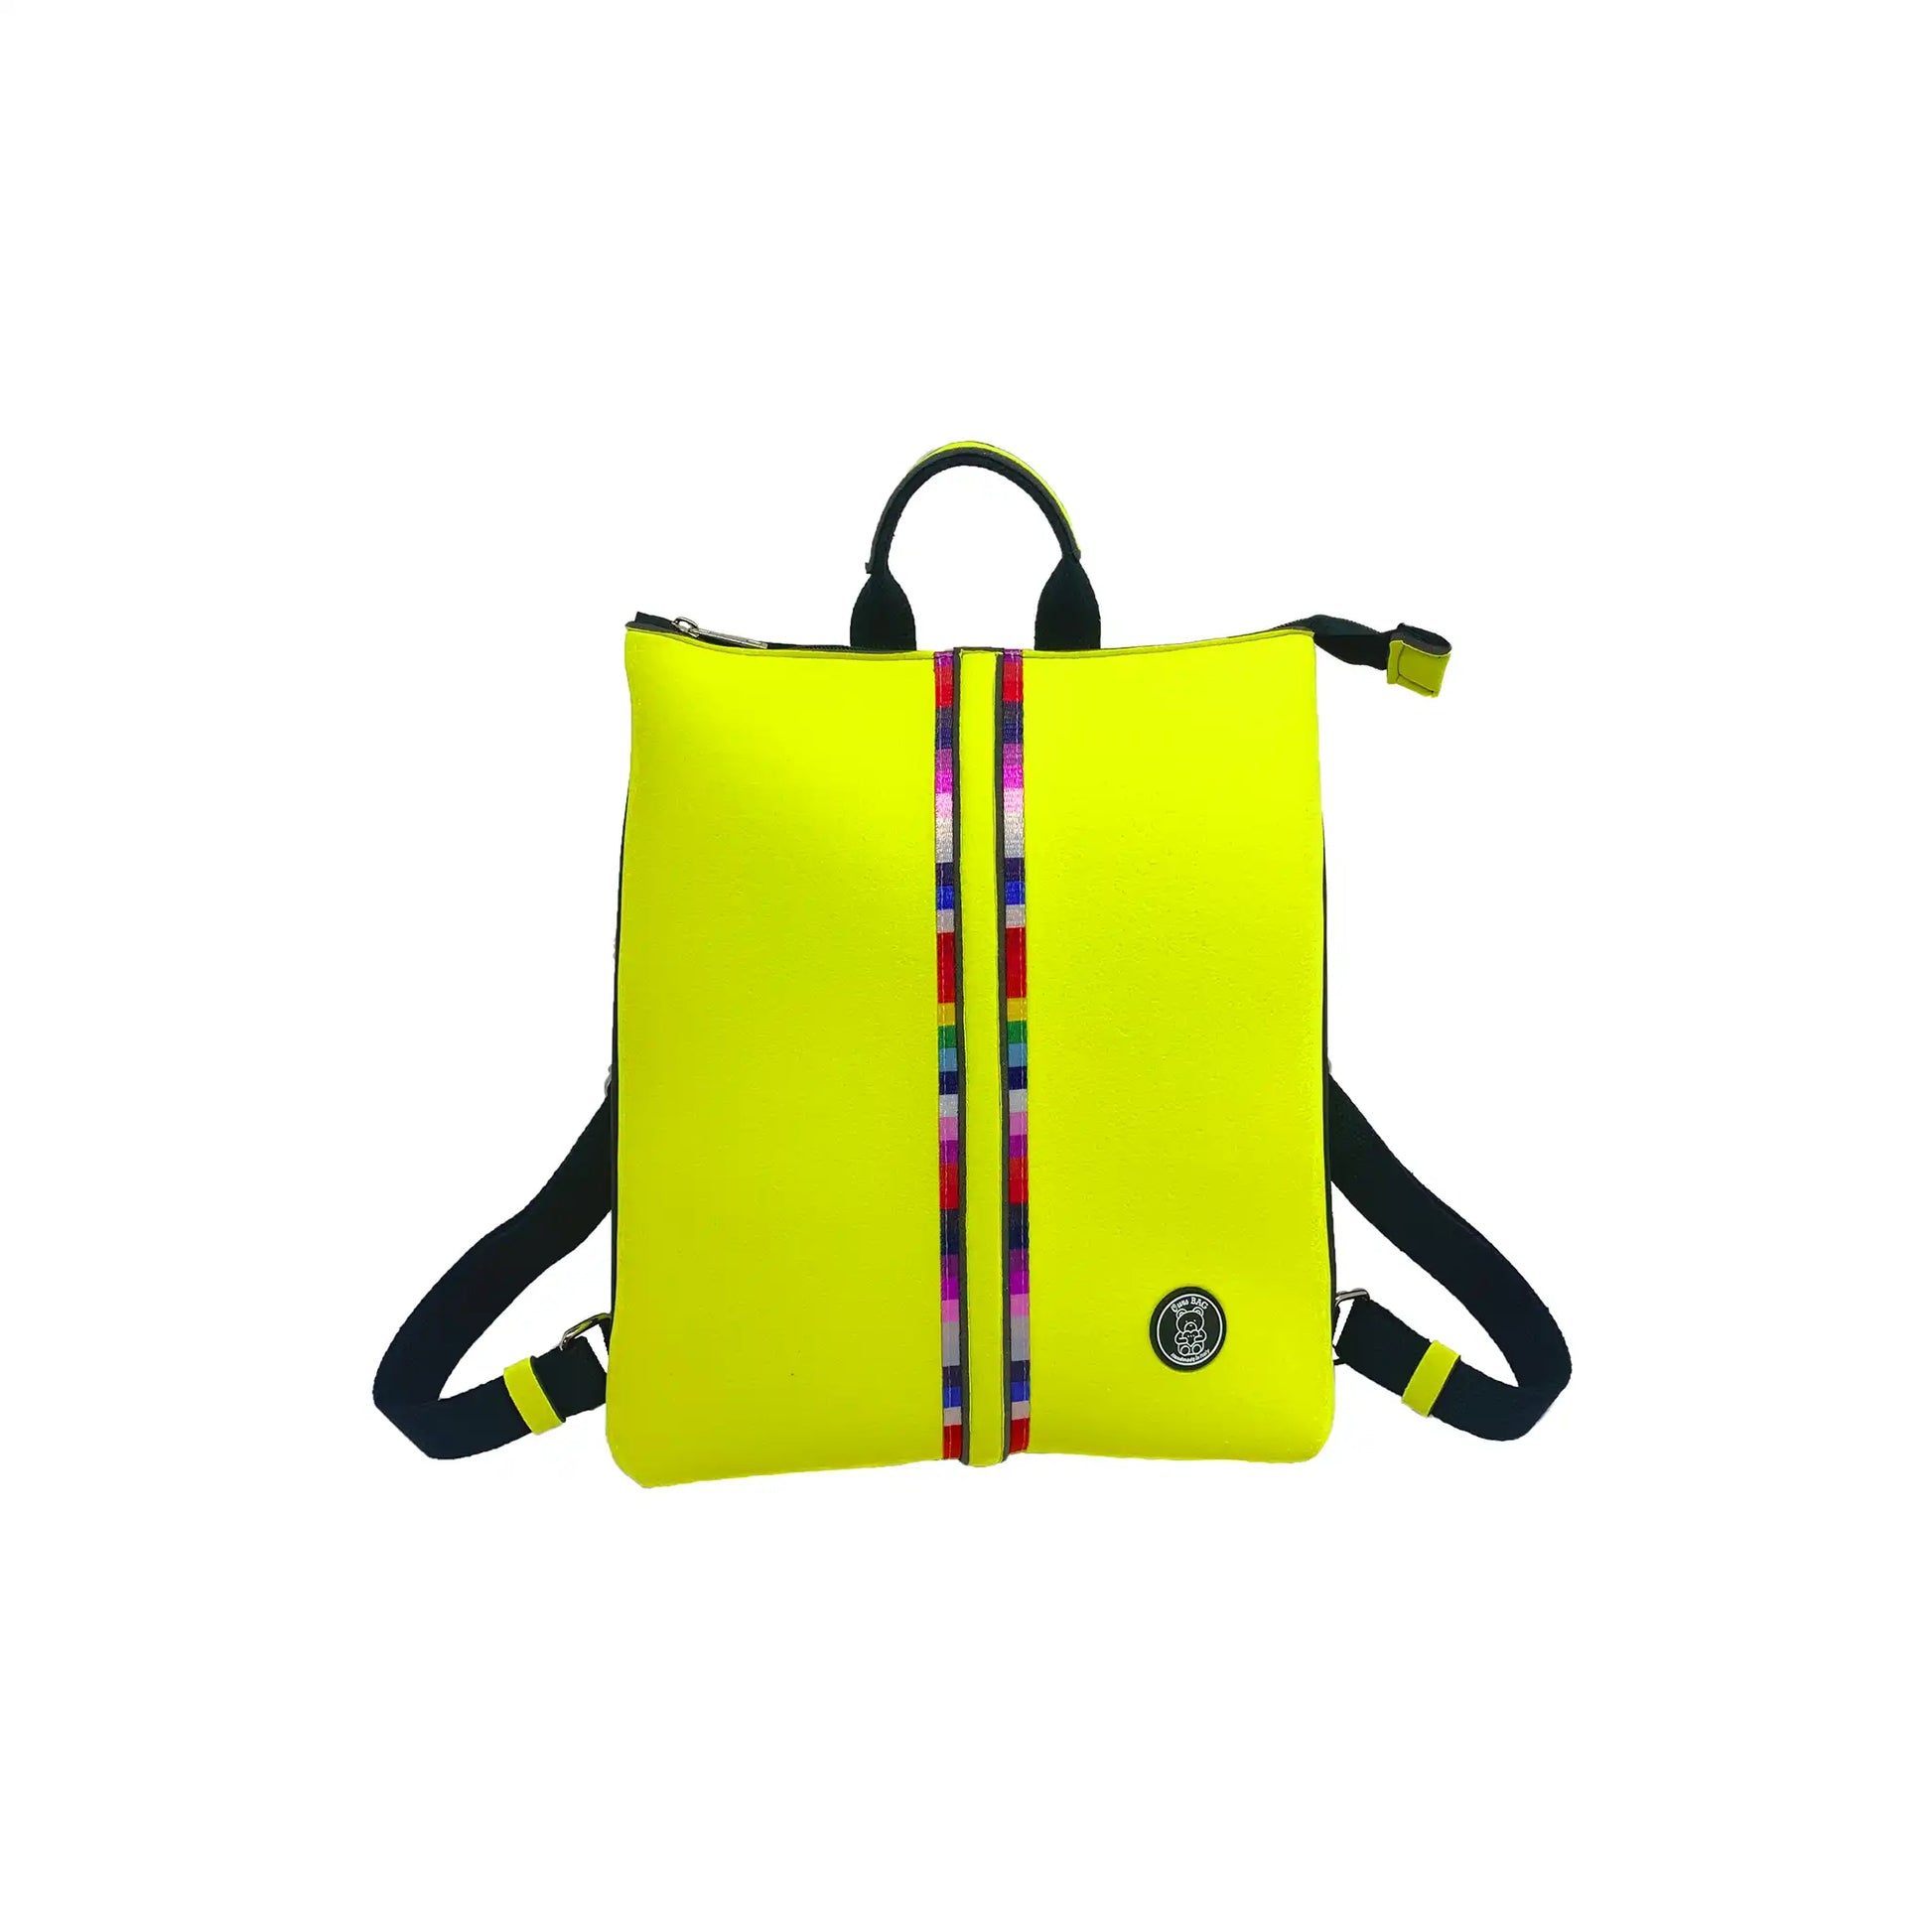 Zainetto Donna Ours Bag (Yellow)